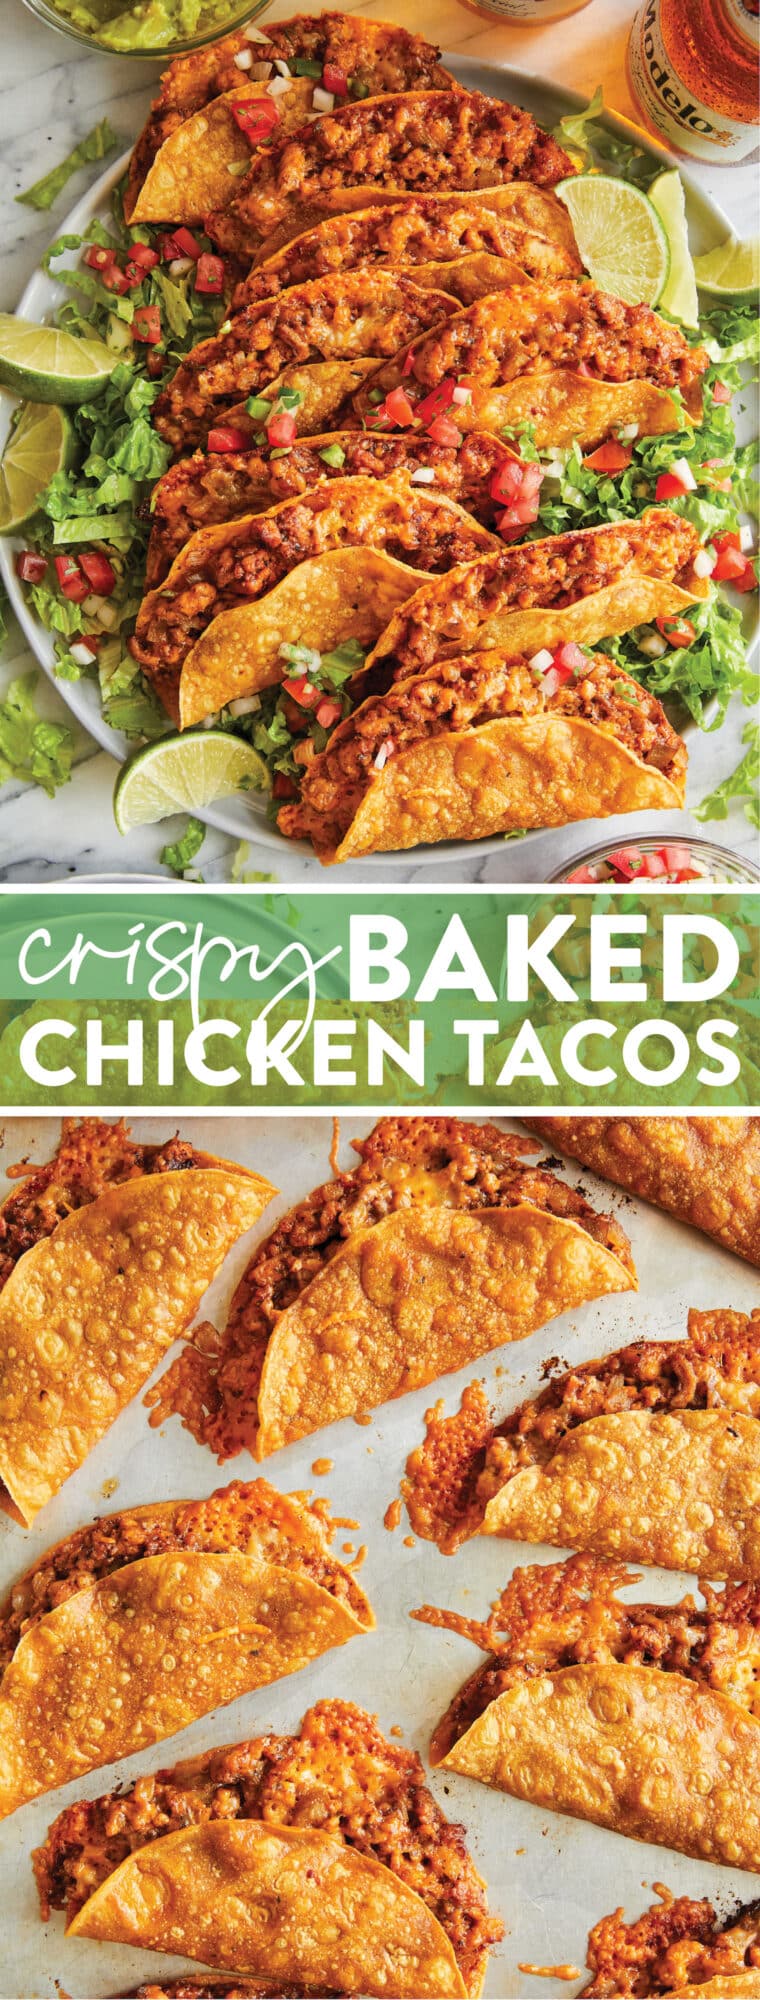 Crispy Baked Chicken Tacos - OH-SO-CRISP, crispy, cheesy chicken tacos, baked entirely to absolute PERFECTION.  A super easy weeknight meal!